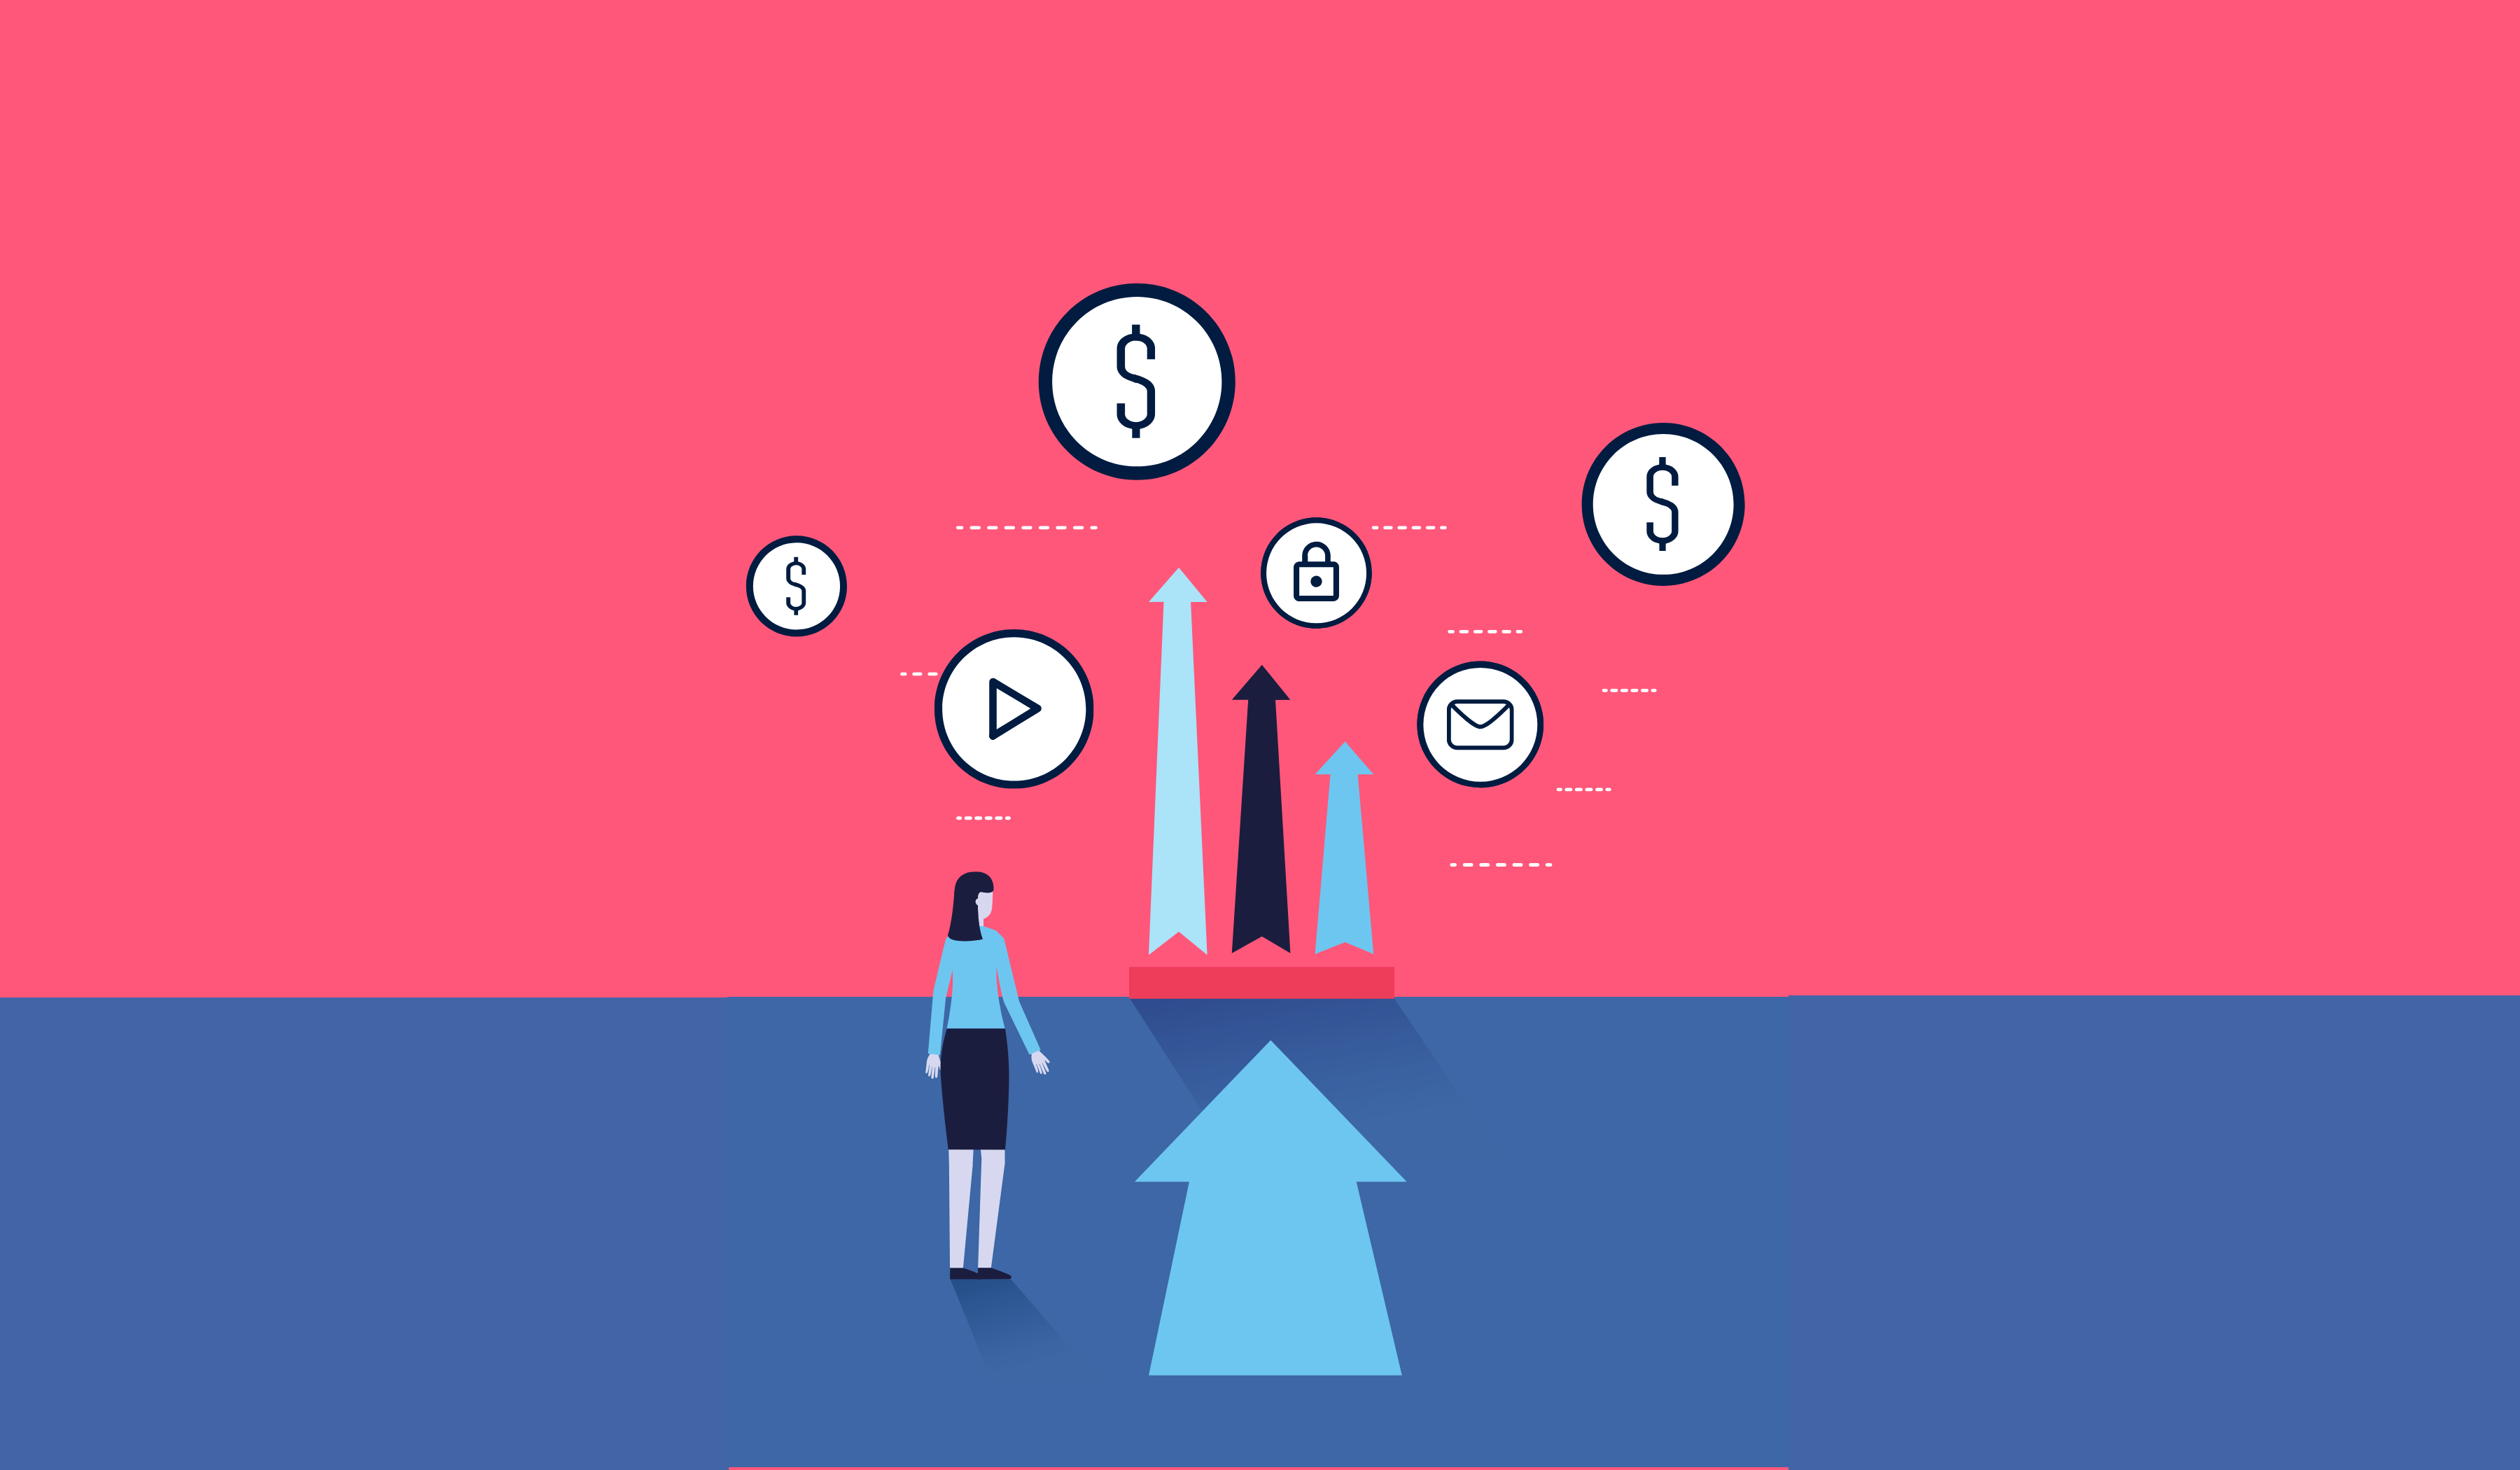 Pink and blue background with dollar sign and play button icons along with a person and 4 arrows